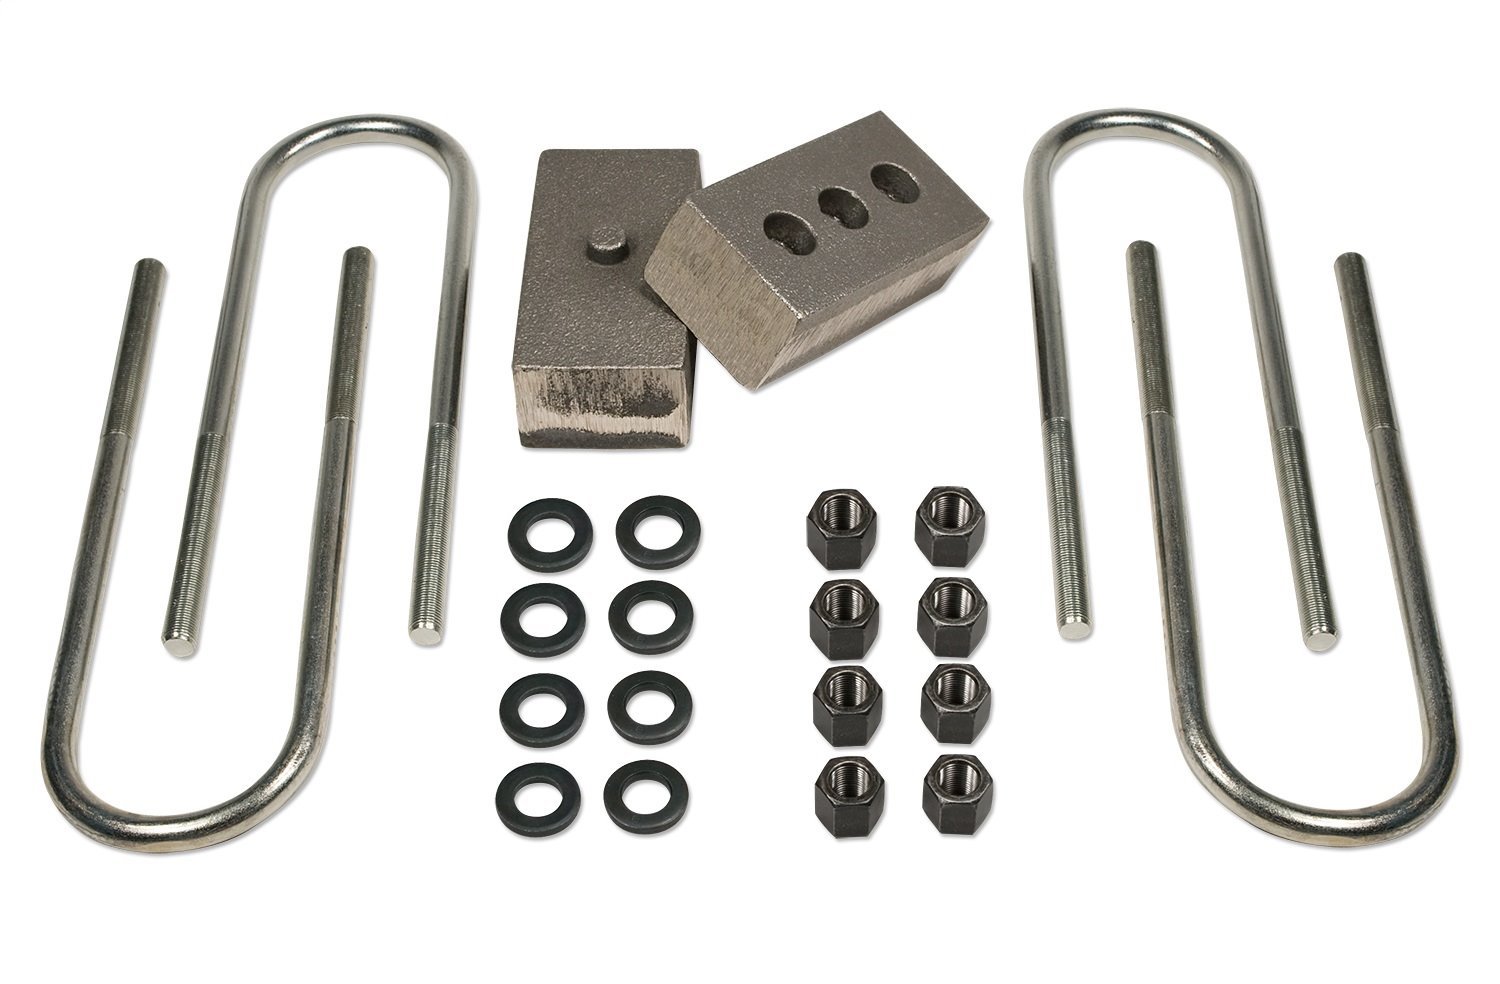 Axle Lift Blocks Kit 2 in. H x 3 in. W x 5.75 in. L Non-Tapered For Vehicles w/4 in. Rear Axle Tube Dual Pinned Incl. U-Bolts